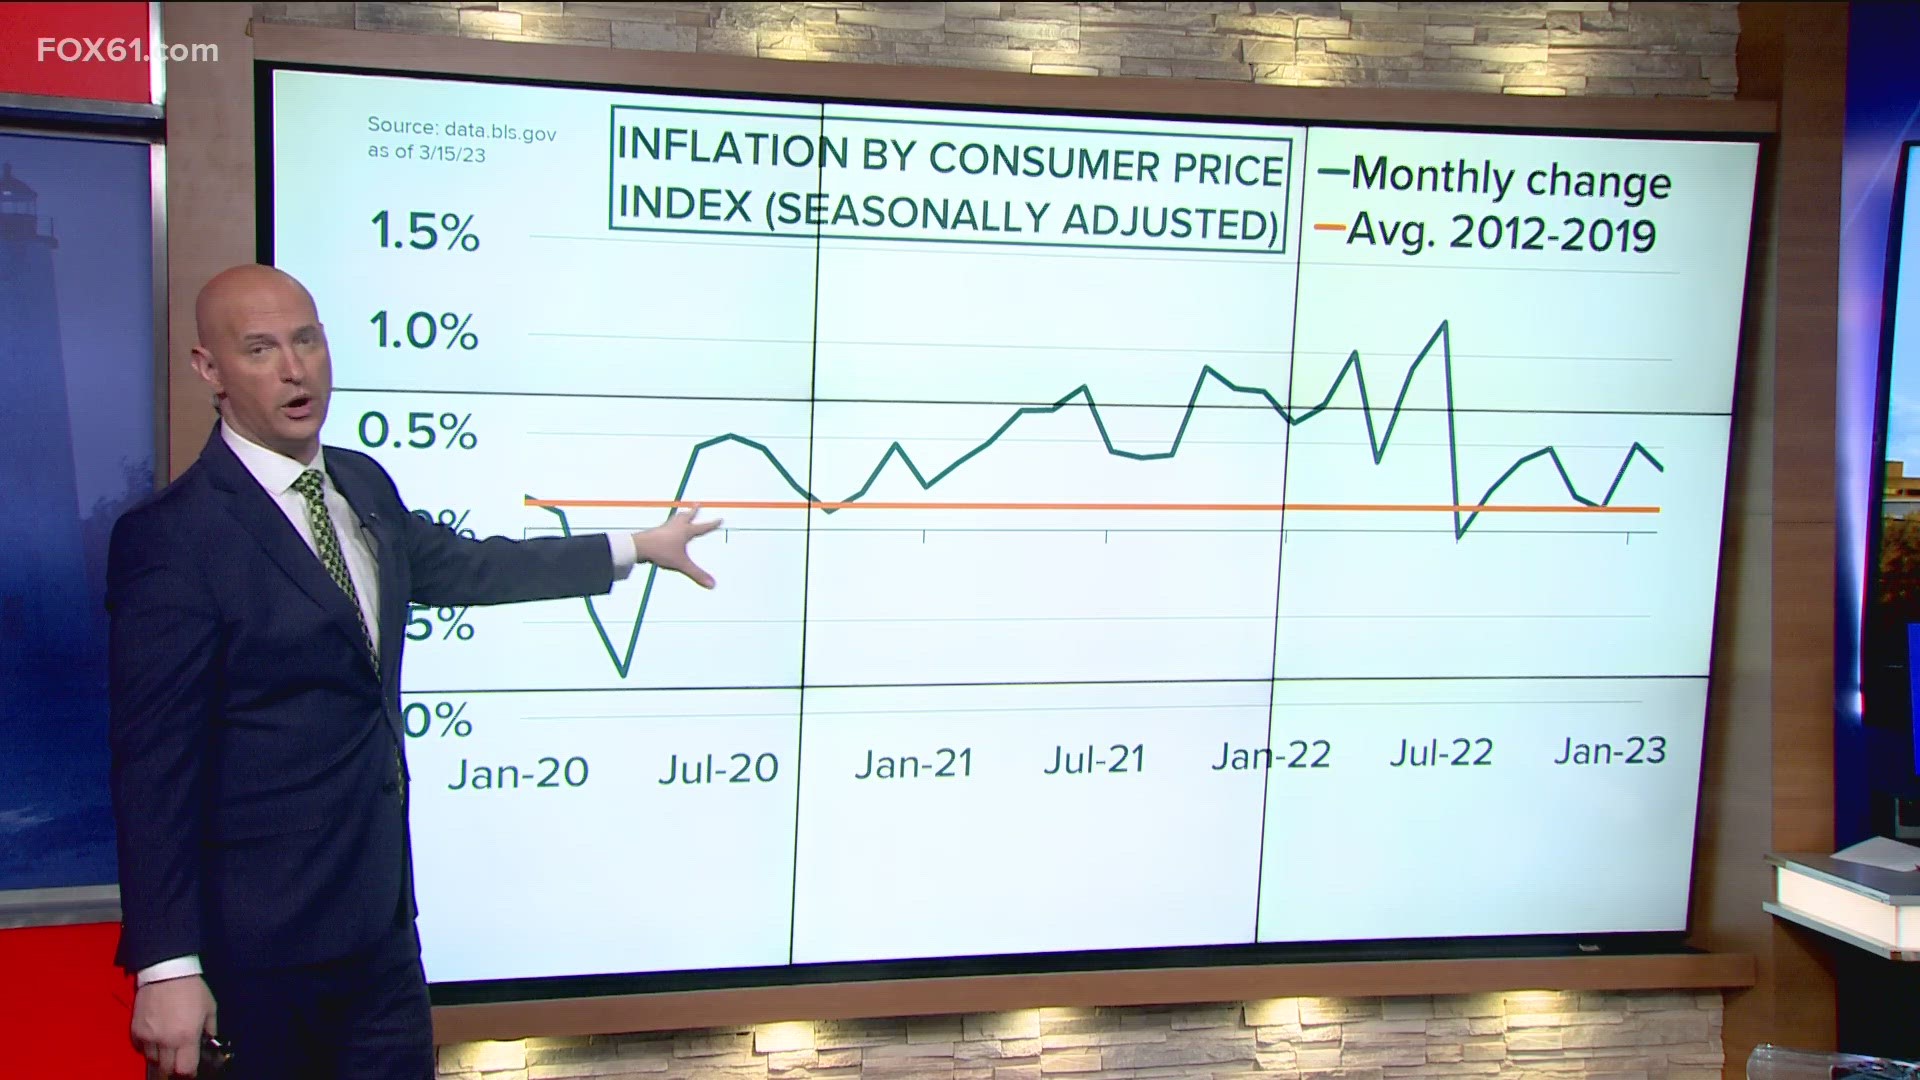 FOx61's Tim Lammers breaks down the latest inflation numbers.